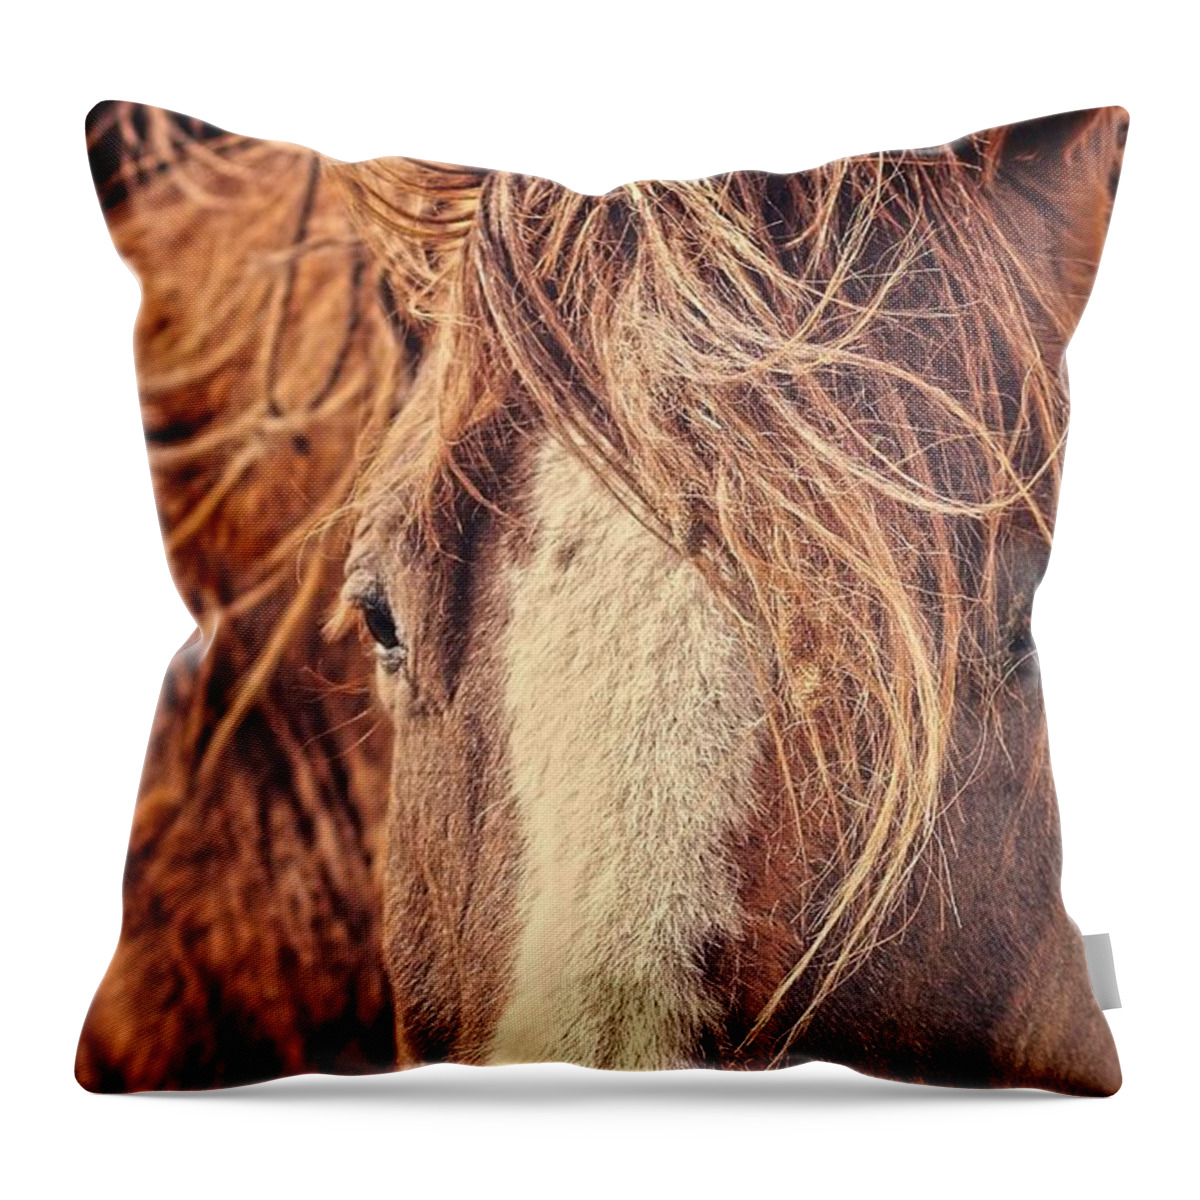 Rustic Throw Pillow featuring the photograph Rustic Eyes by Amanda Smith